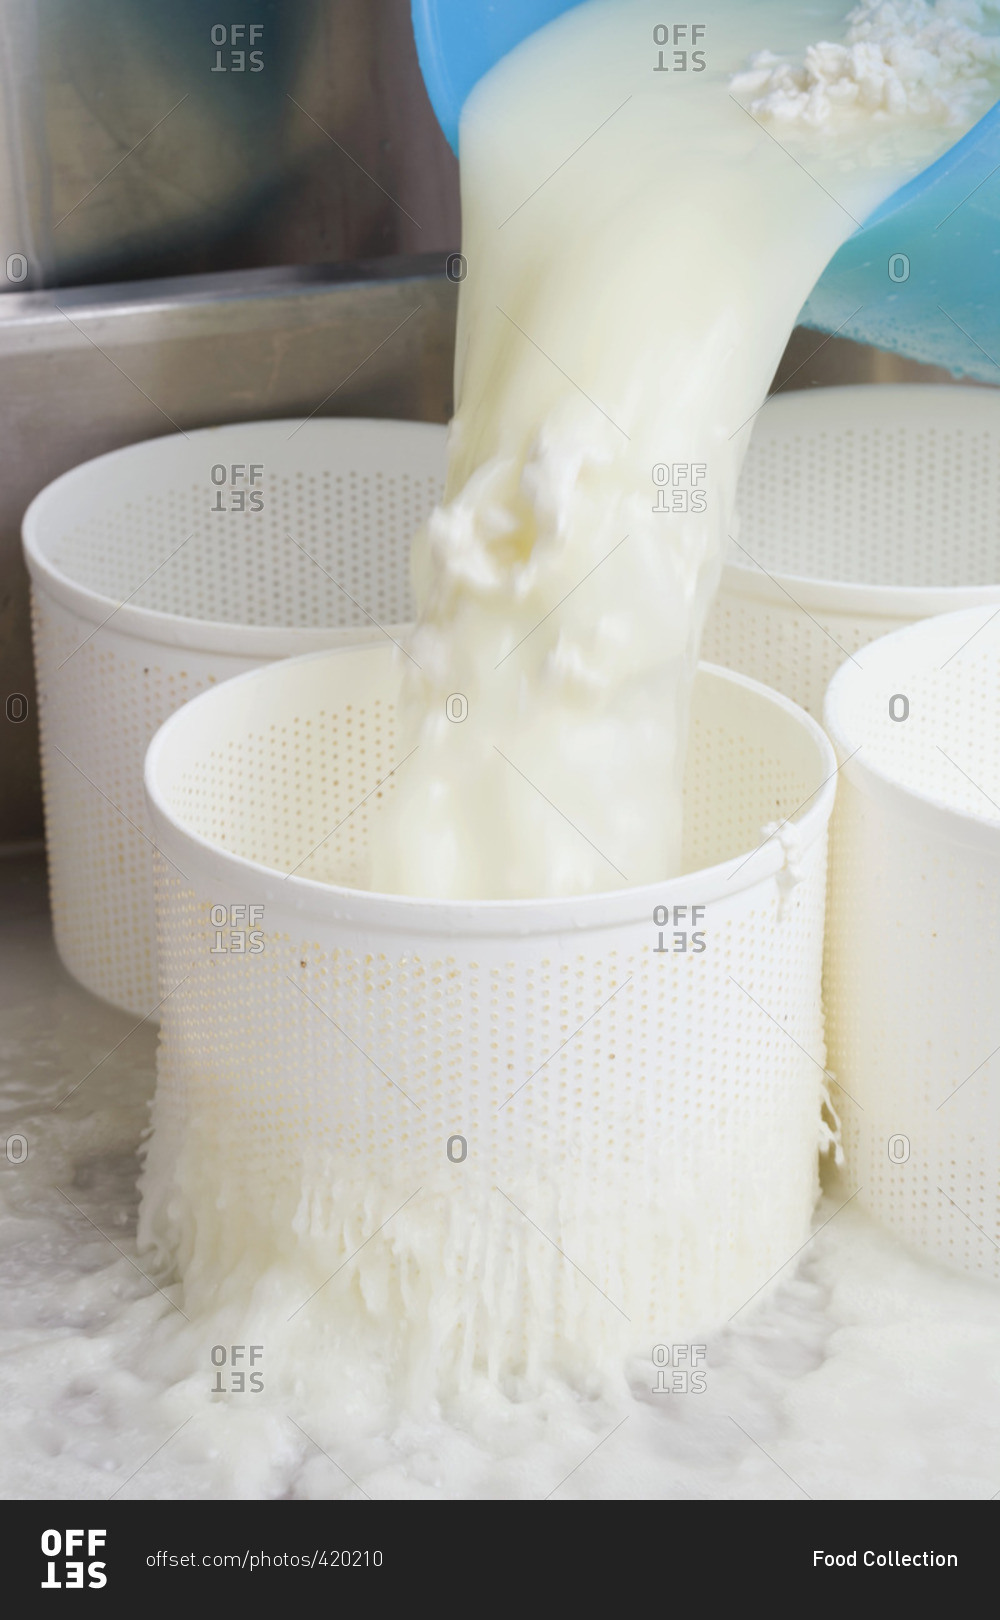 Cheese-making (Pouring cheese curds into perforated molds)